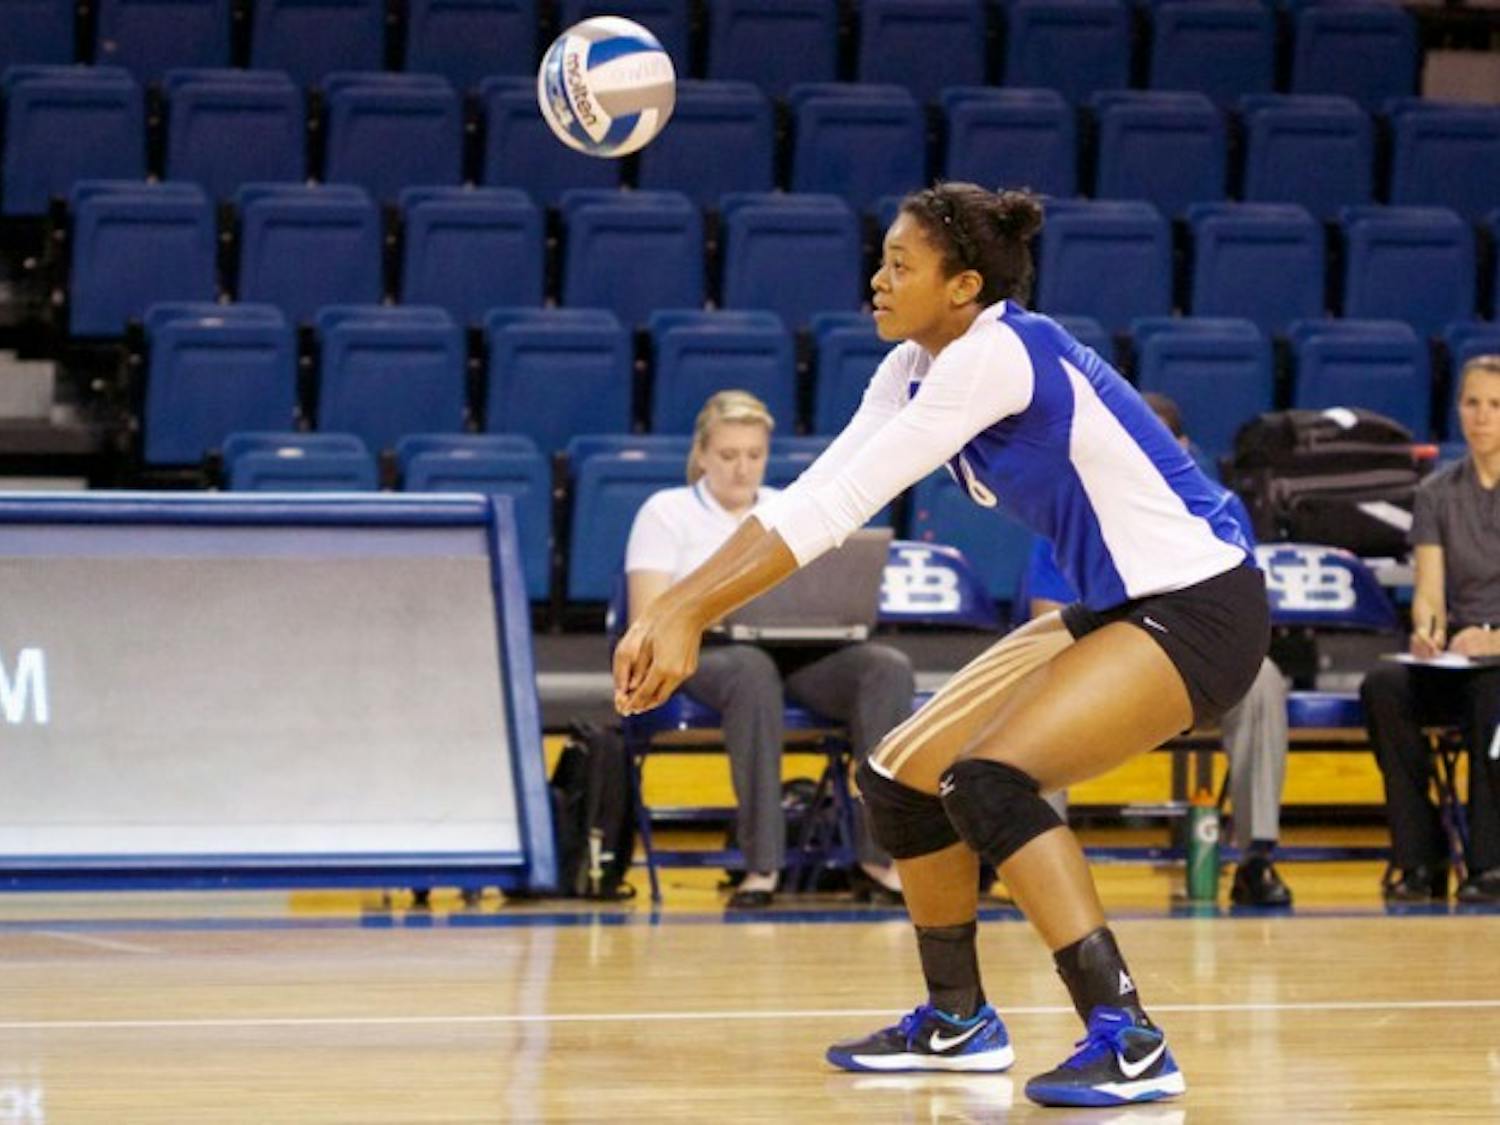 Junior outside hitter Tahleia Bishop is a preseason All-MAC selection heading into the season, as the volleyball team begins its first season under head coach Reed Sunahara.&nbsp;Chad Cooper, The Spectrum